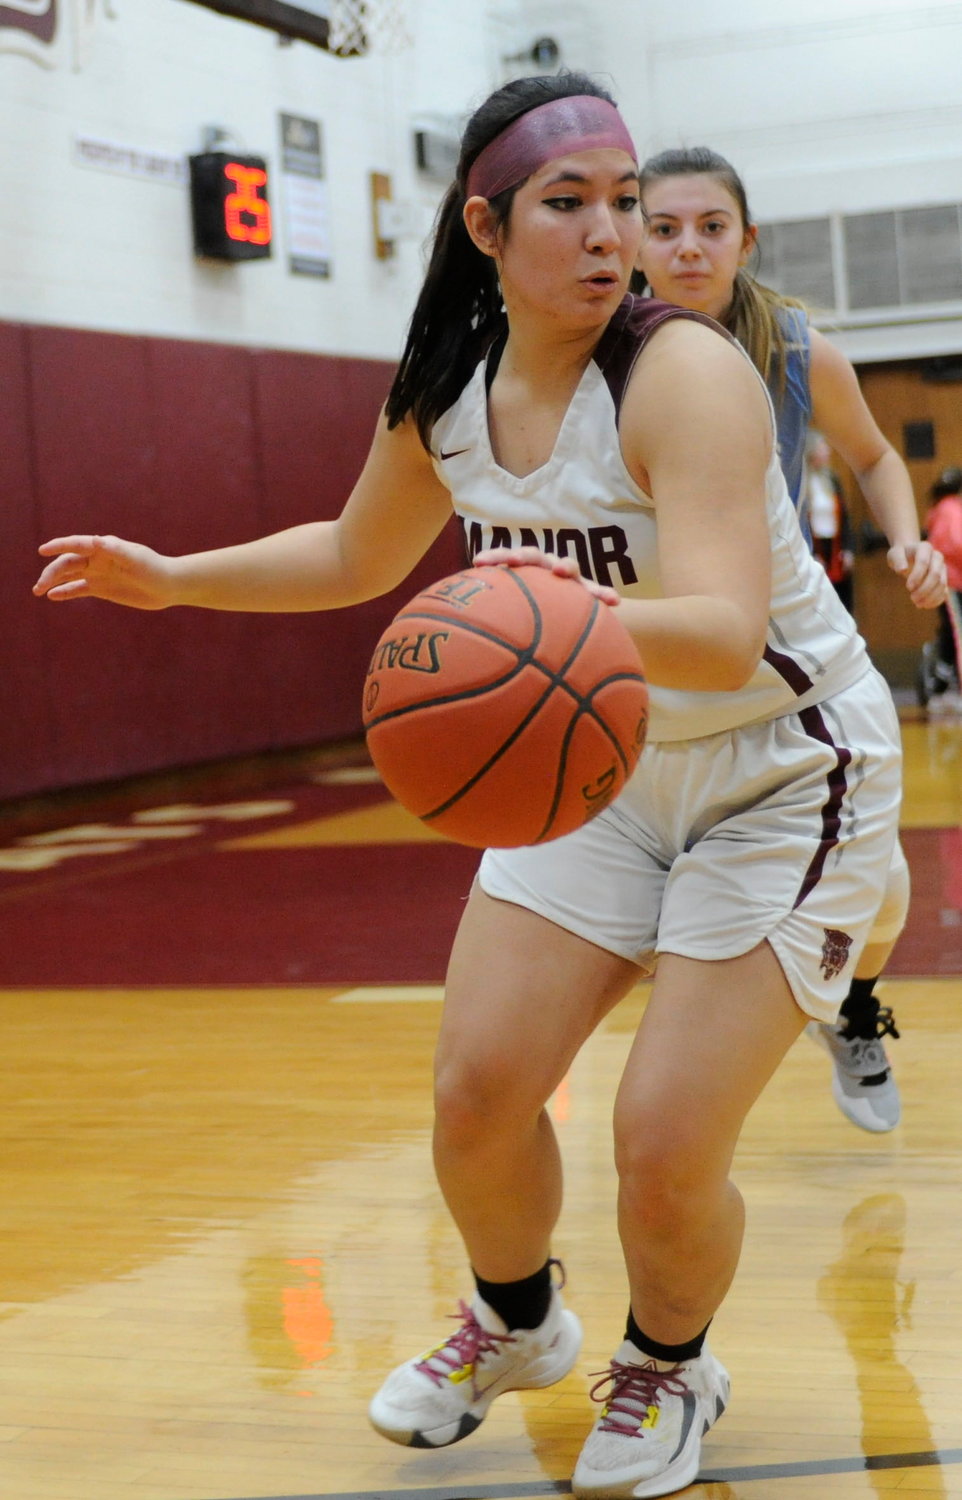 Manor’s Jocelyn Mills, a senior guard/forward, posted 5 points, including a three-pointer.